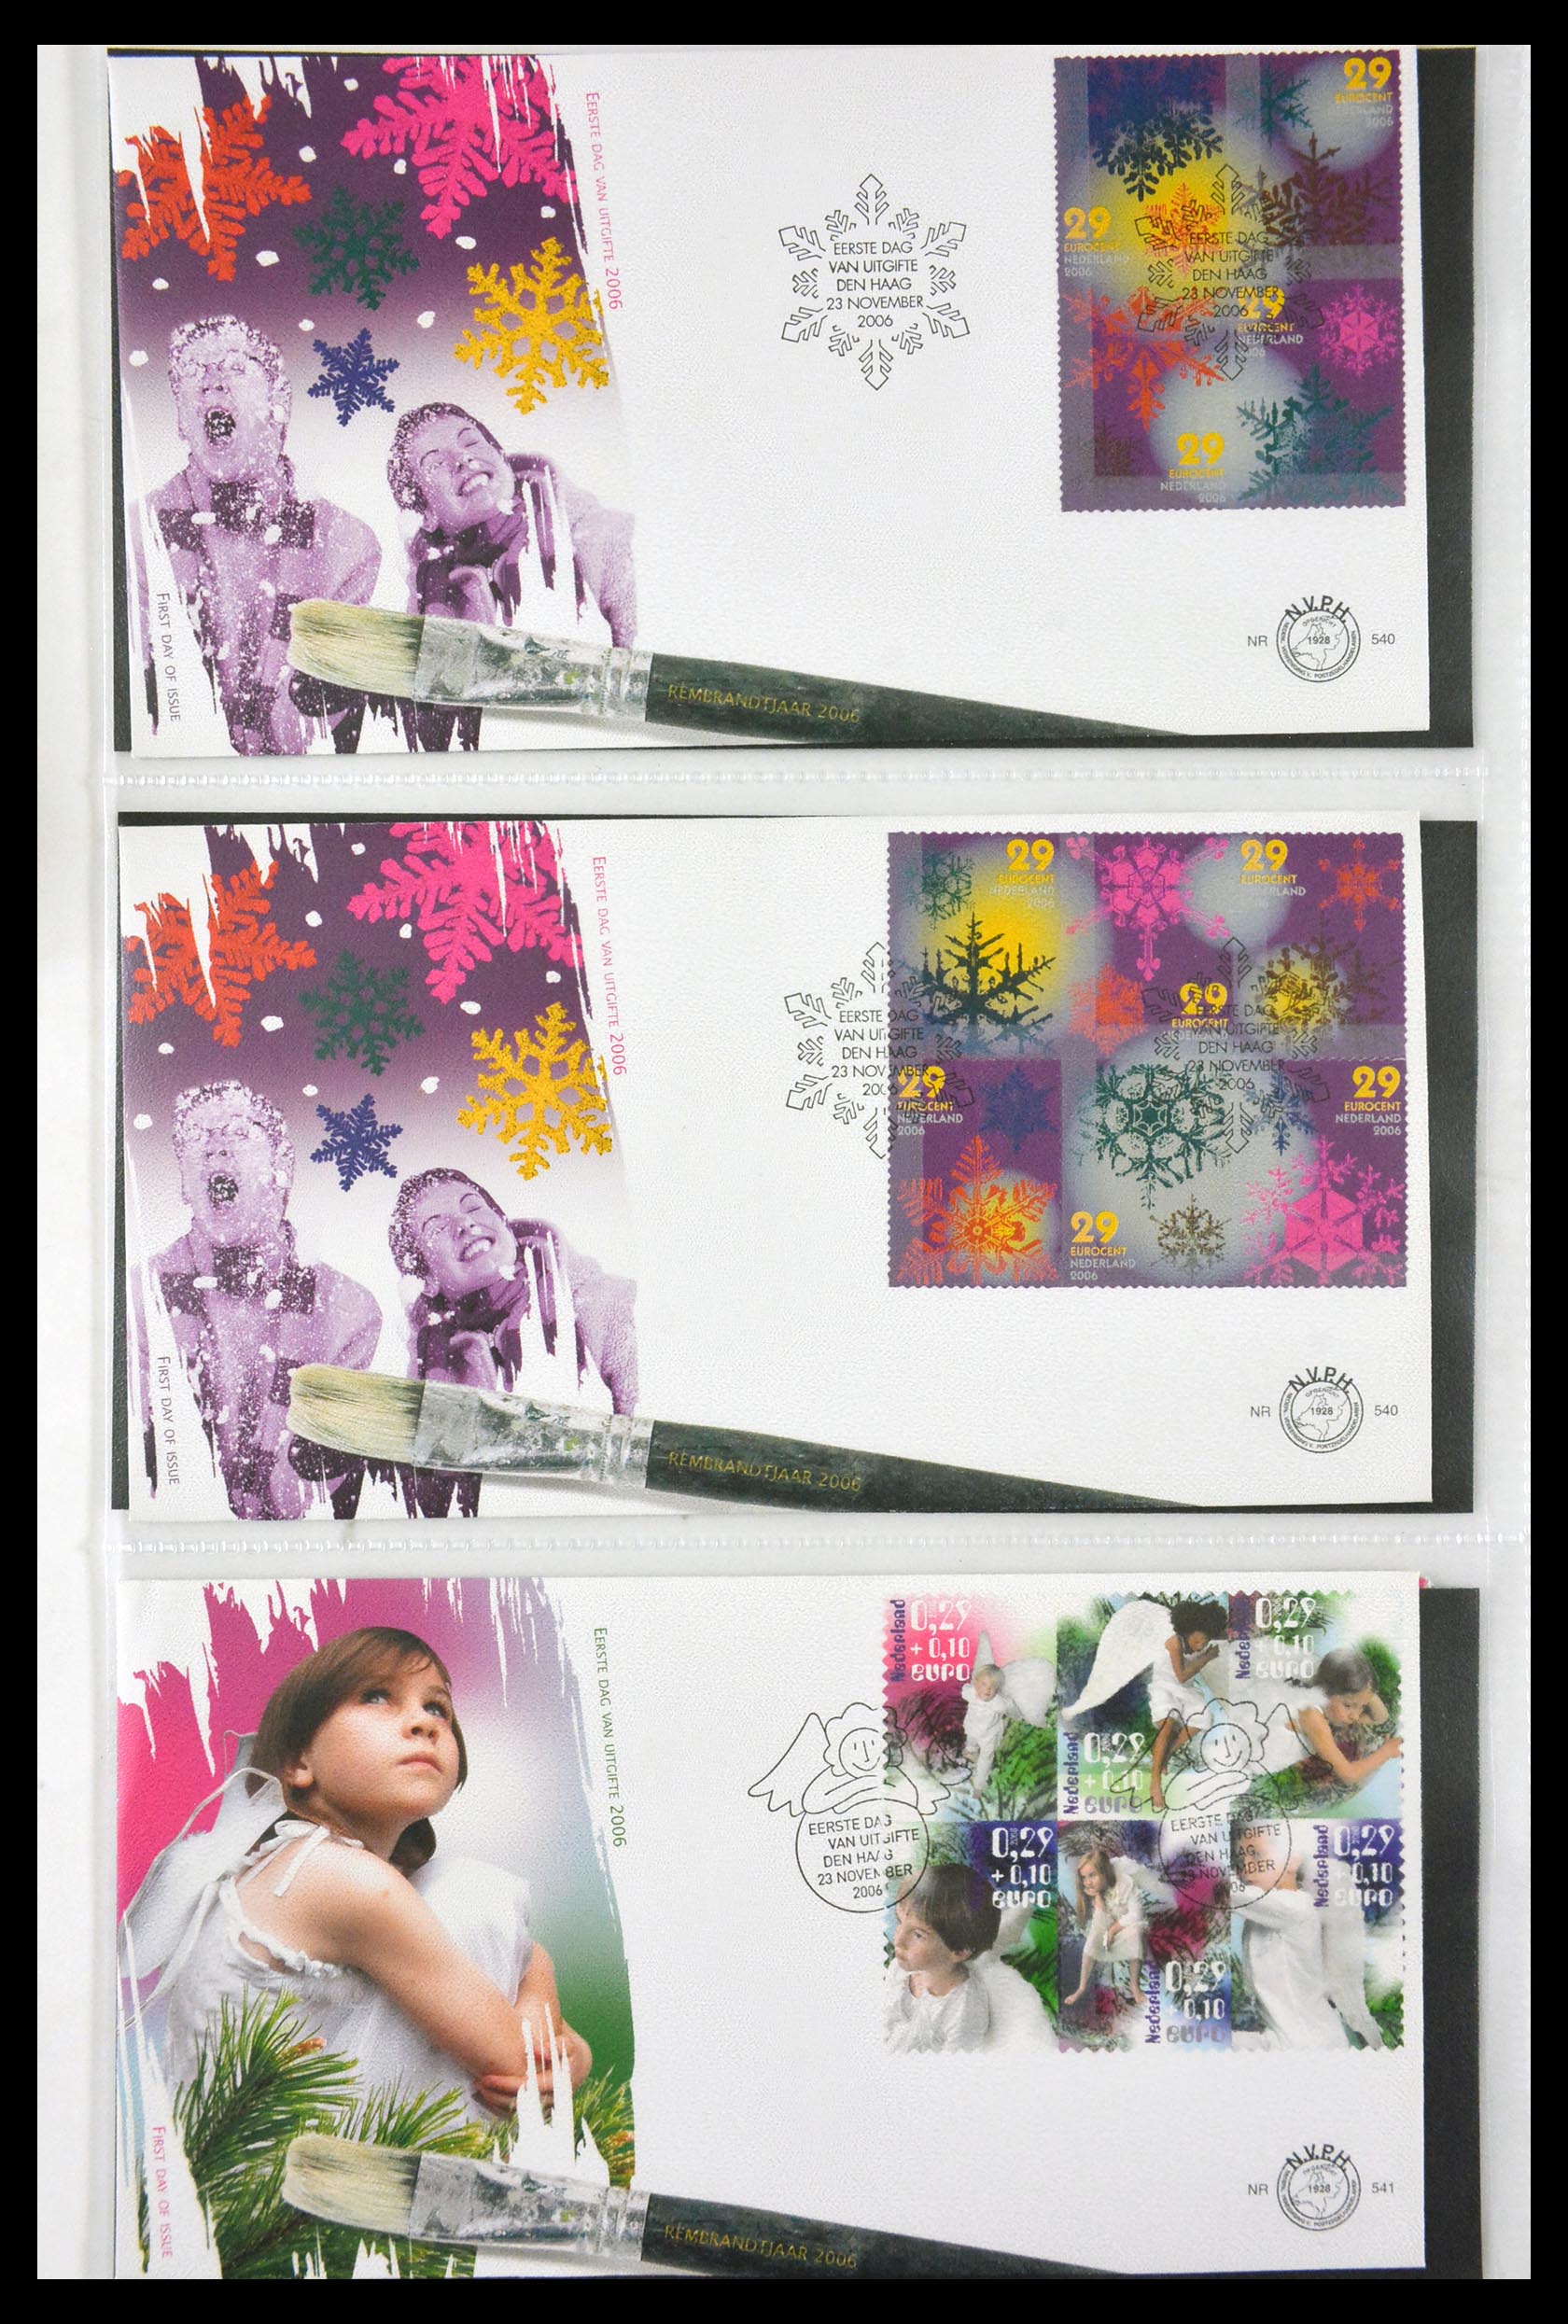 29850 046 - 29850 Netherlands FDC's 2001-2012.